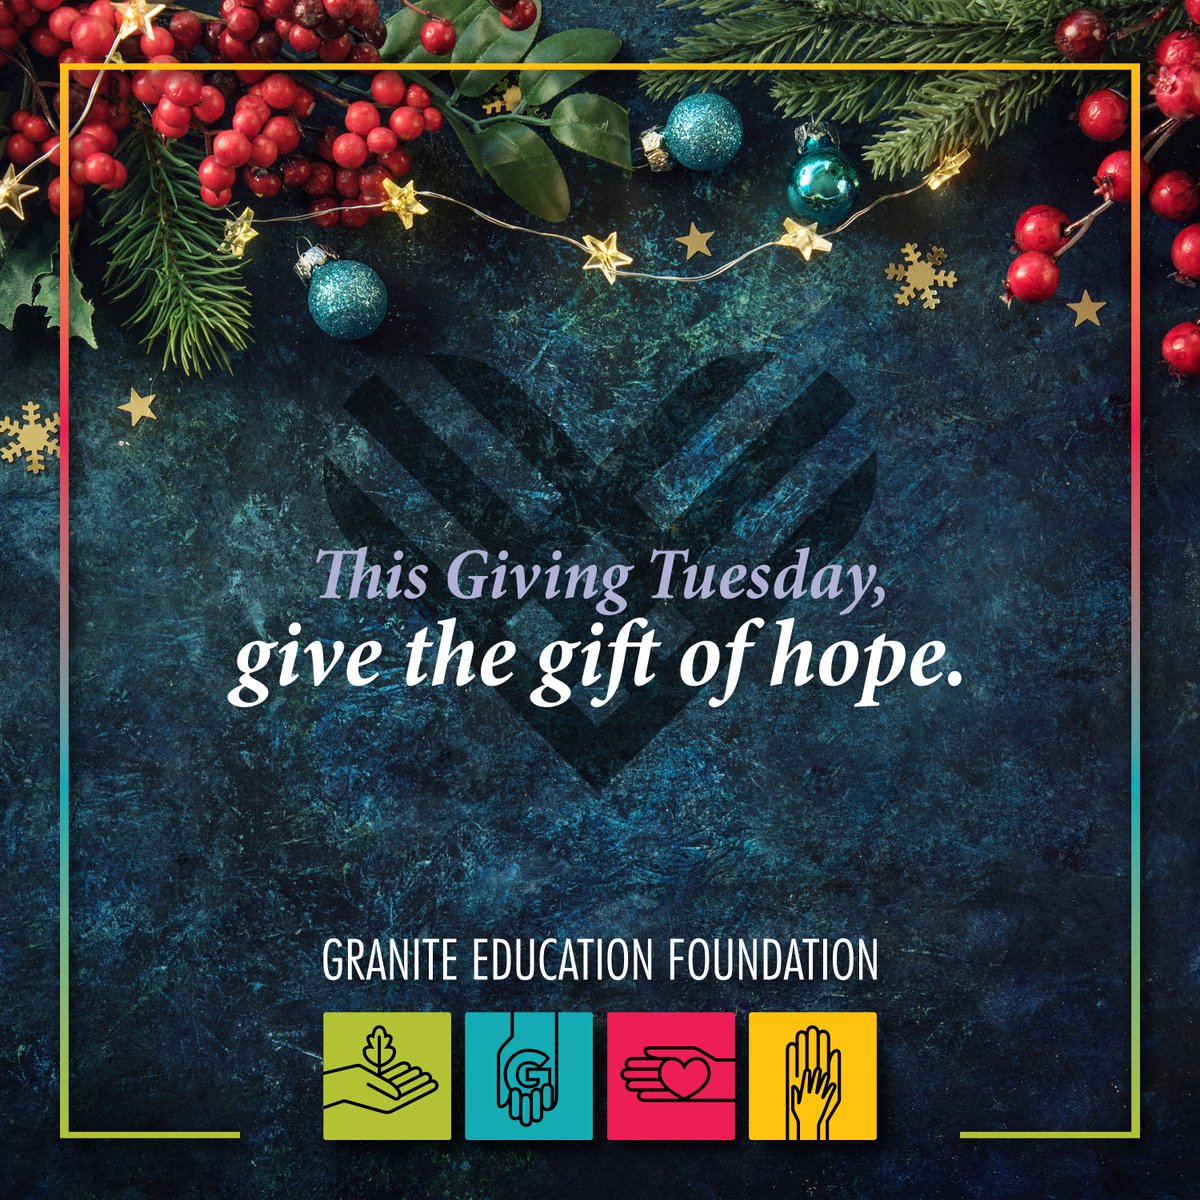 Today is Giving Tuesday, we hope you’ll consider giving a gift that will offer HOPE to the most vulnerable—the most hopeless— children and families right here in our own community. Visit granitekids.org to donate now. More than ever, your gift will offer hope.